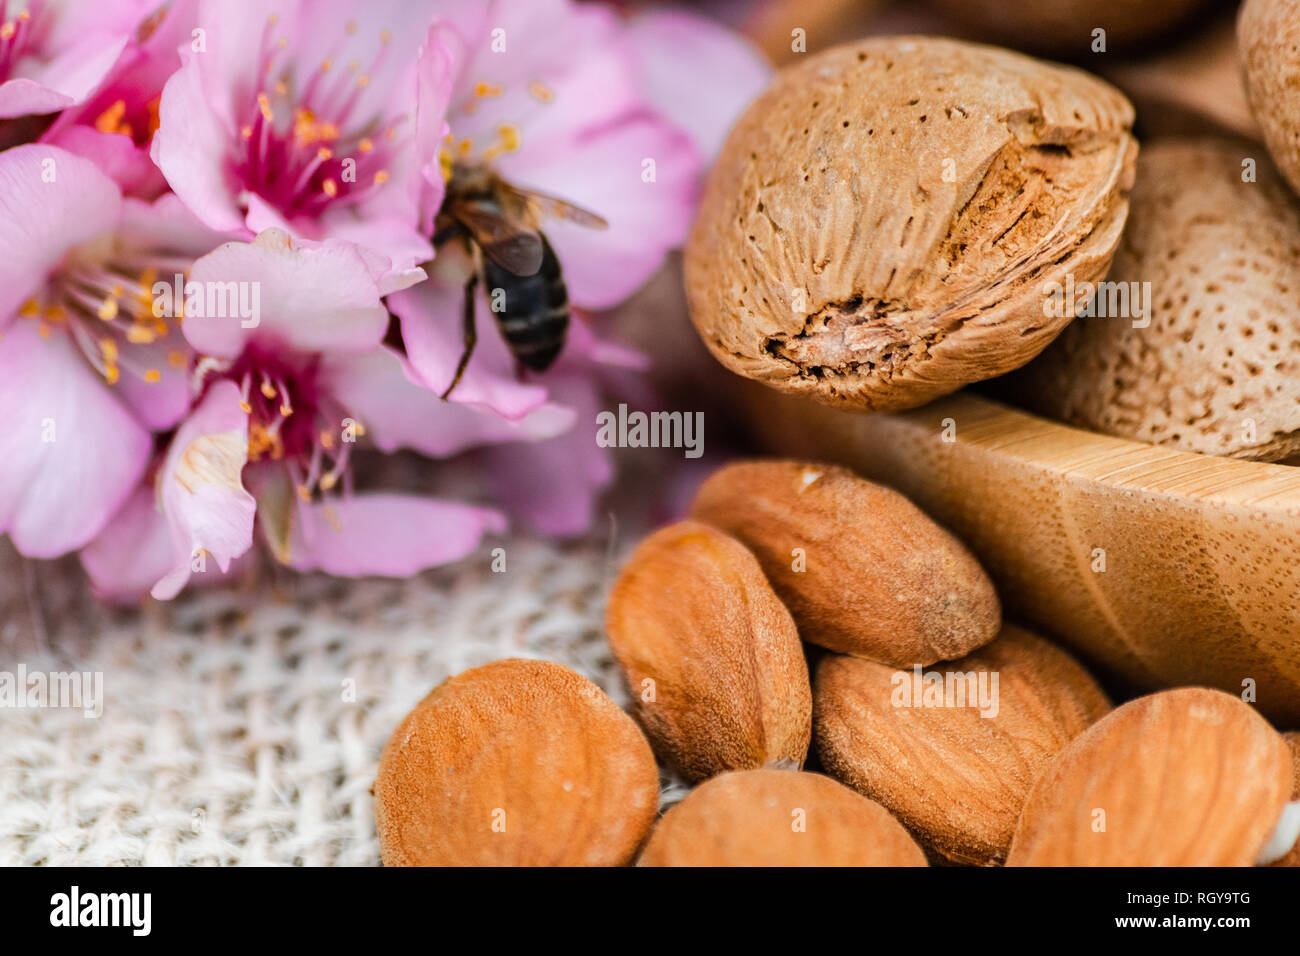 Almonds spilled on sack surface, almonds with shell on wooden bowl, and bee pollinating almond flowers Stock Photo